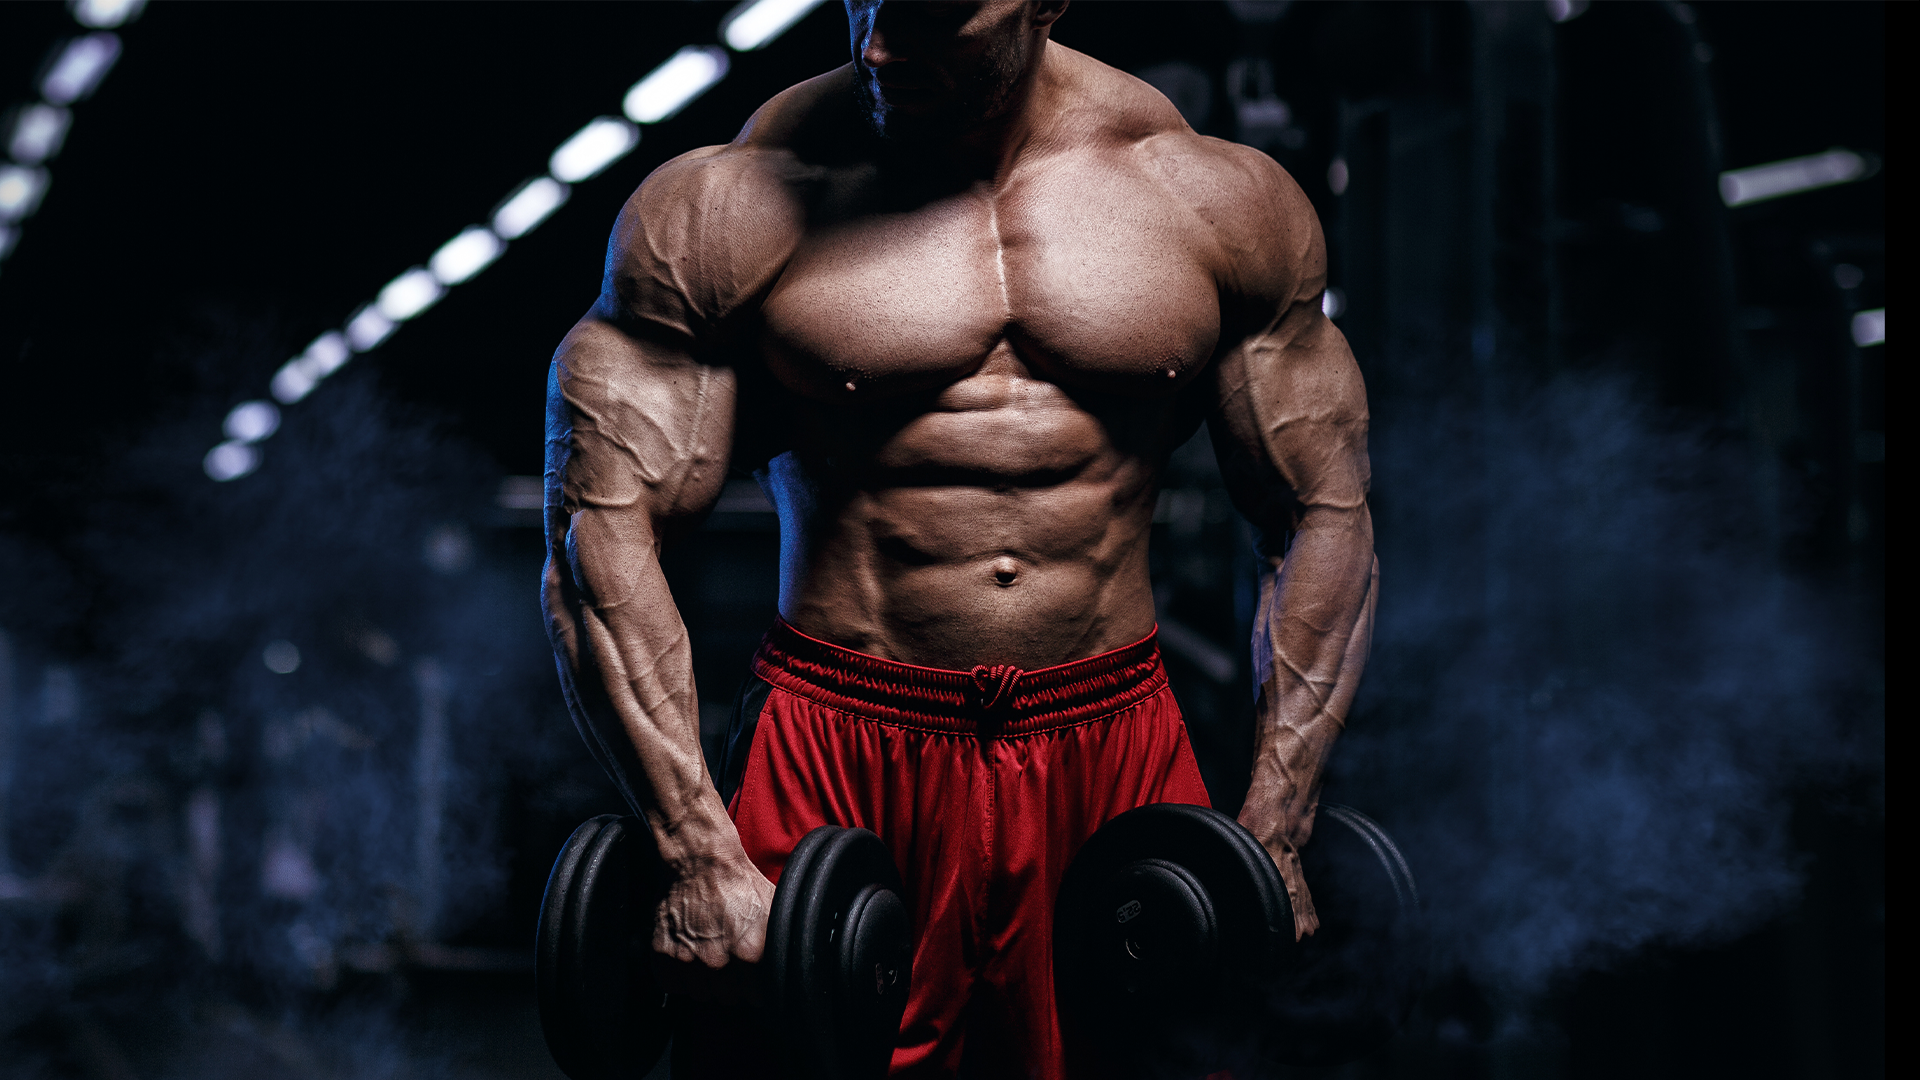 Bodybuilder knows the myths about bulking